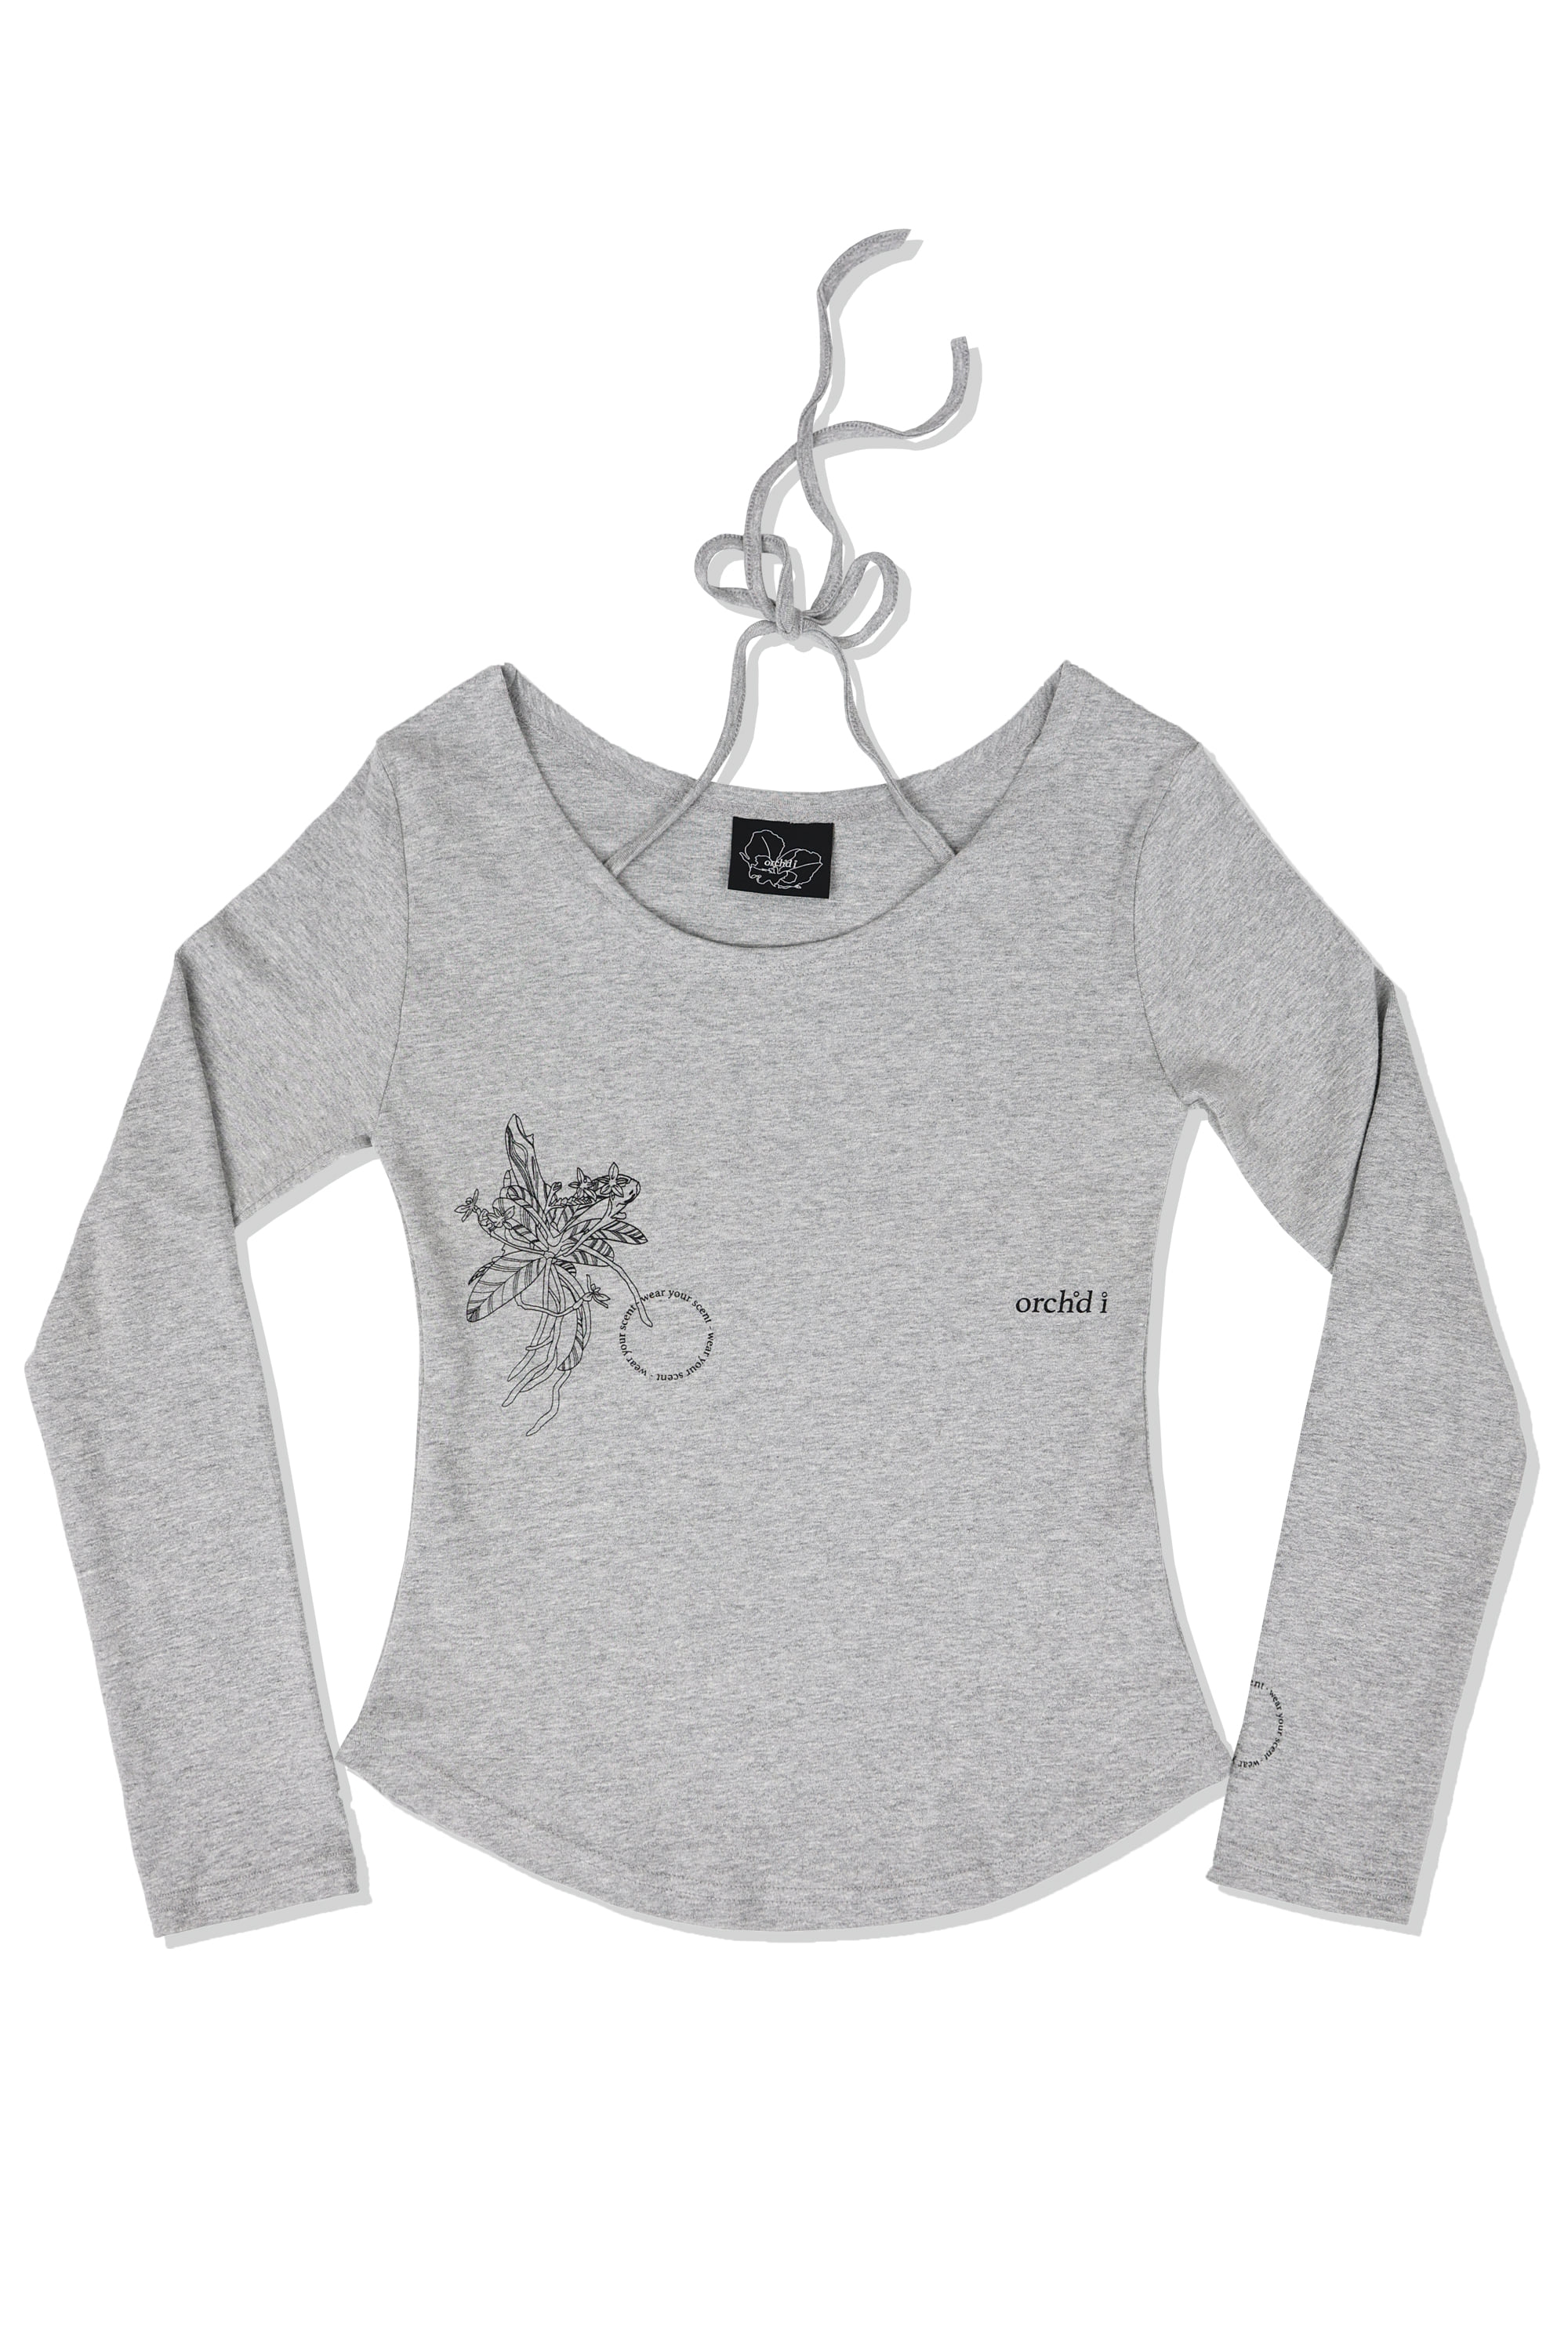 orchid letter tee (gray)